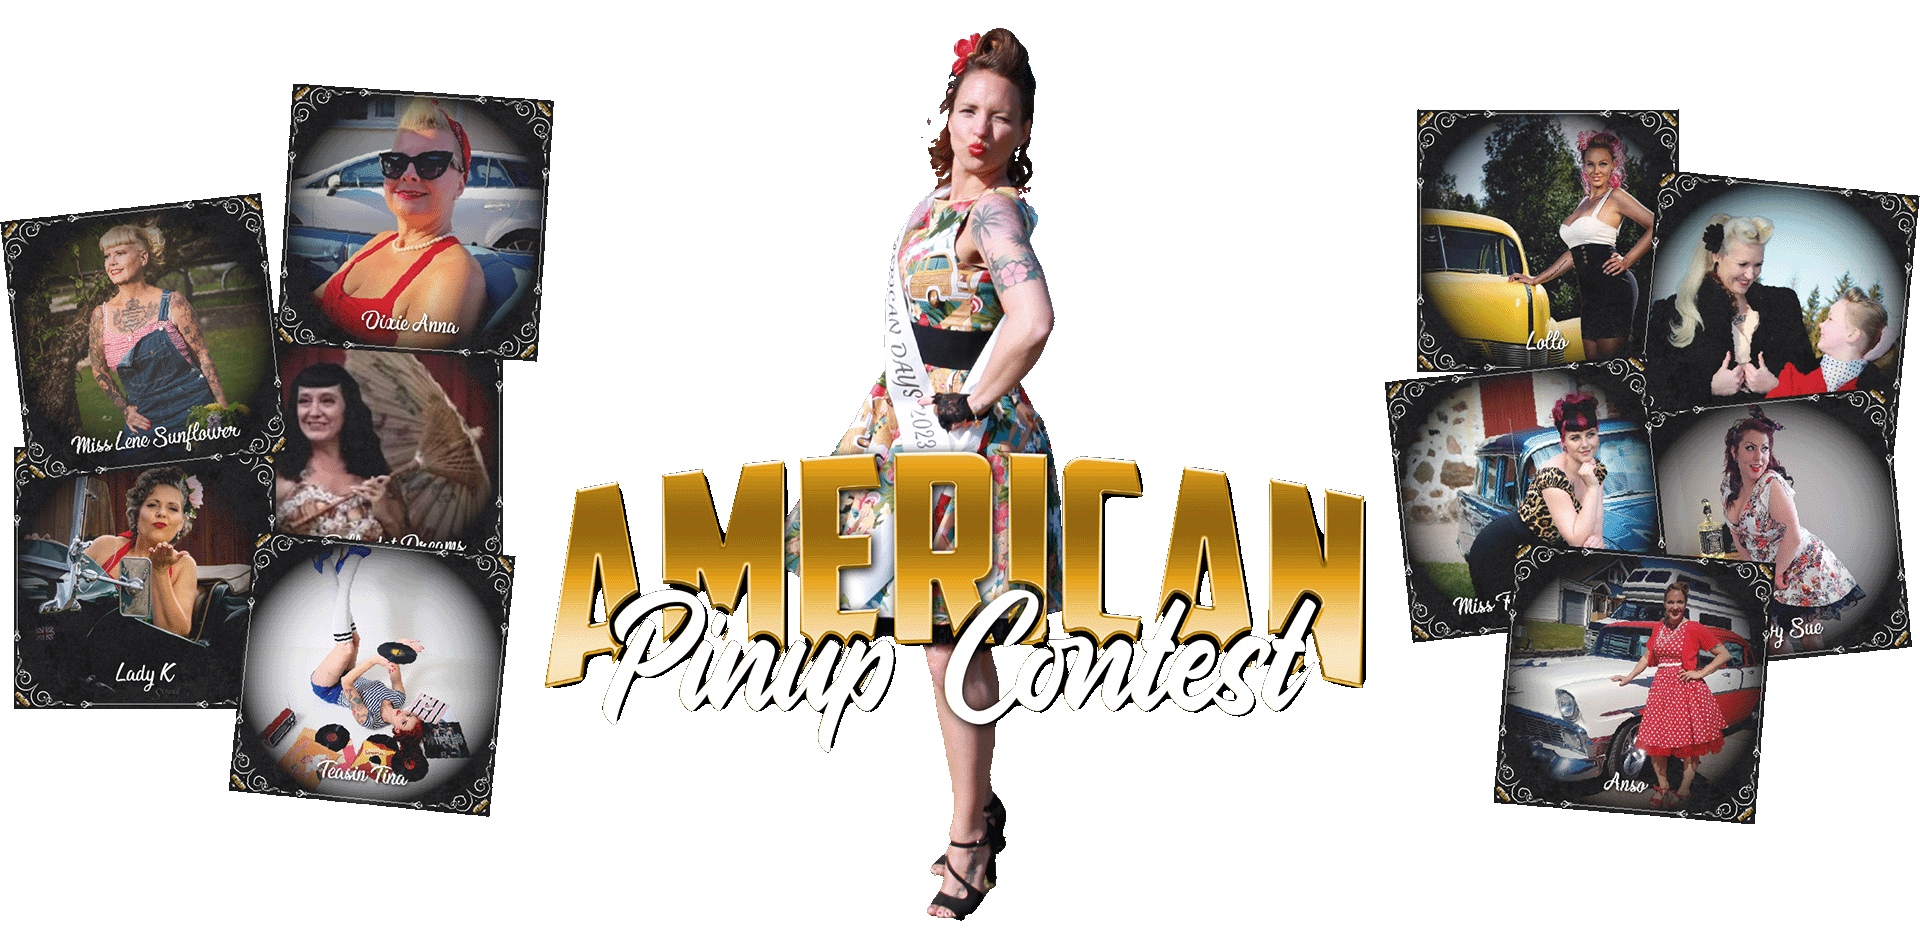 PINUP GIRLS AND APPLICATION AT AMERICAN DAYS